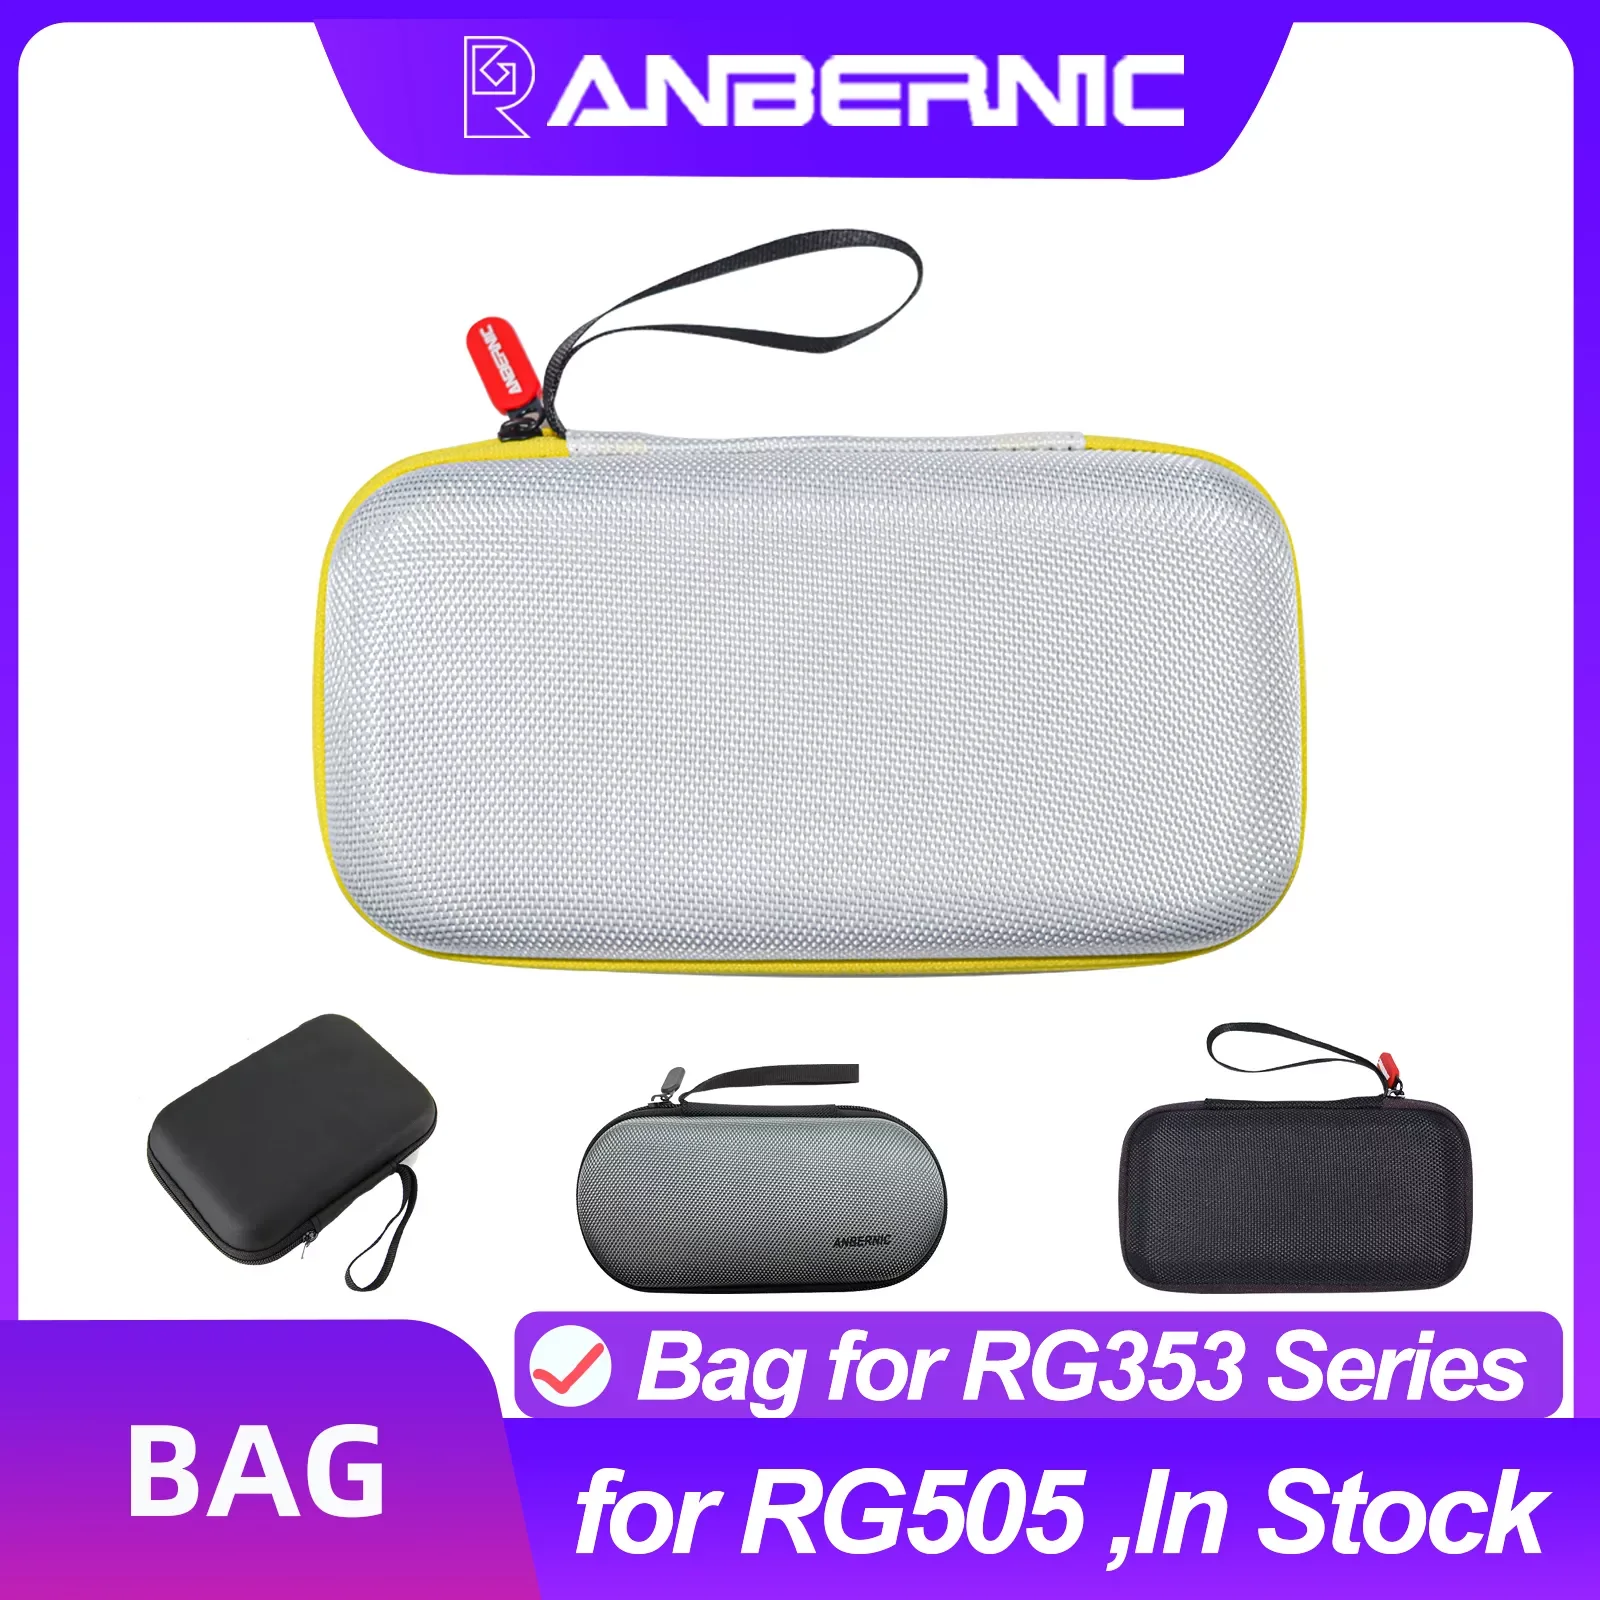 

NEW2023 Anbernic RG505 RG353M RG353P RG353V Bag Waterproof Protection Case for Retro Game Console Portable Handheld Game Player